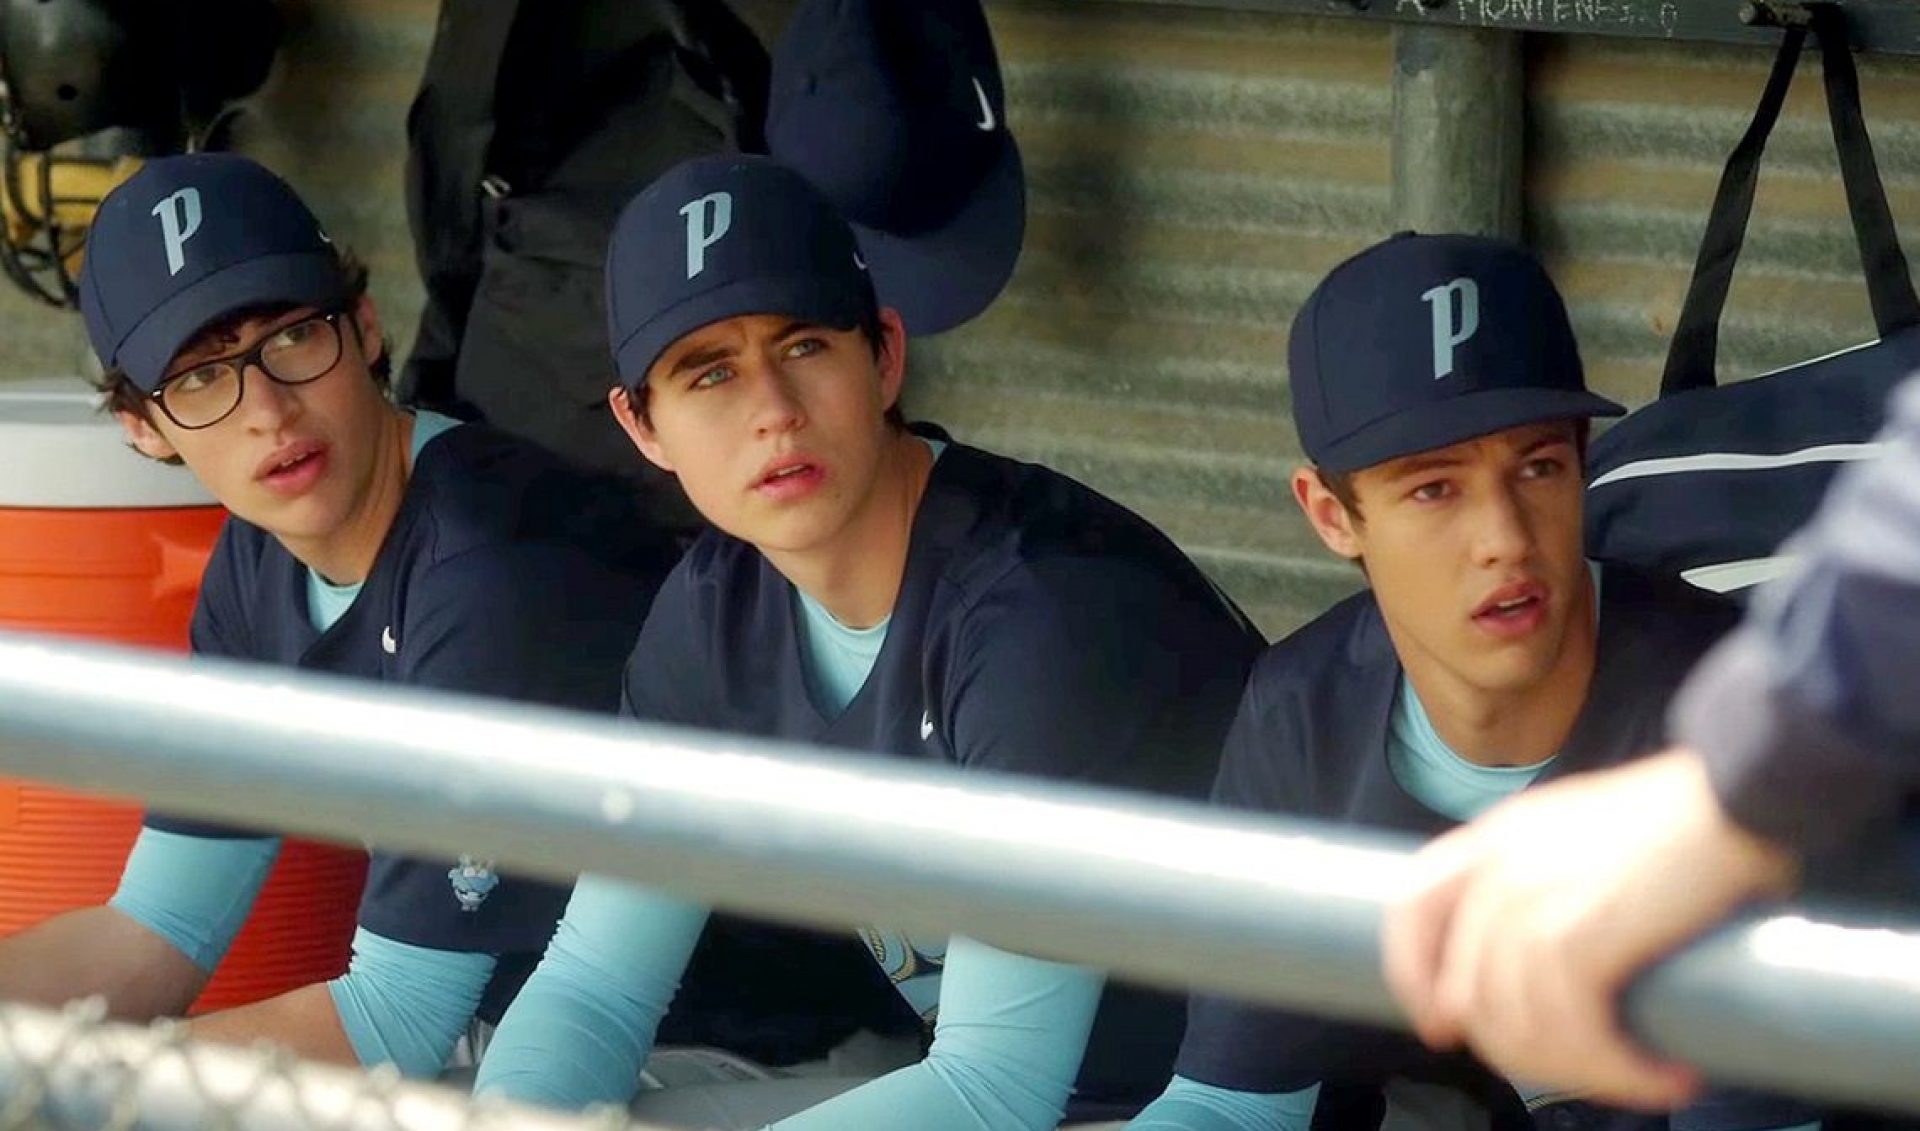 The outfield. The Outfield your Love.